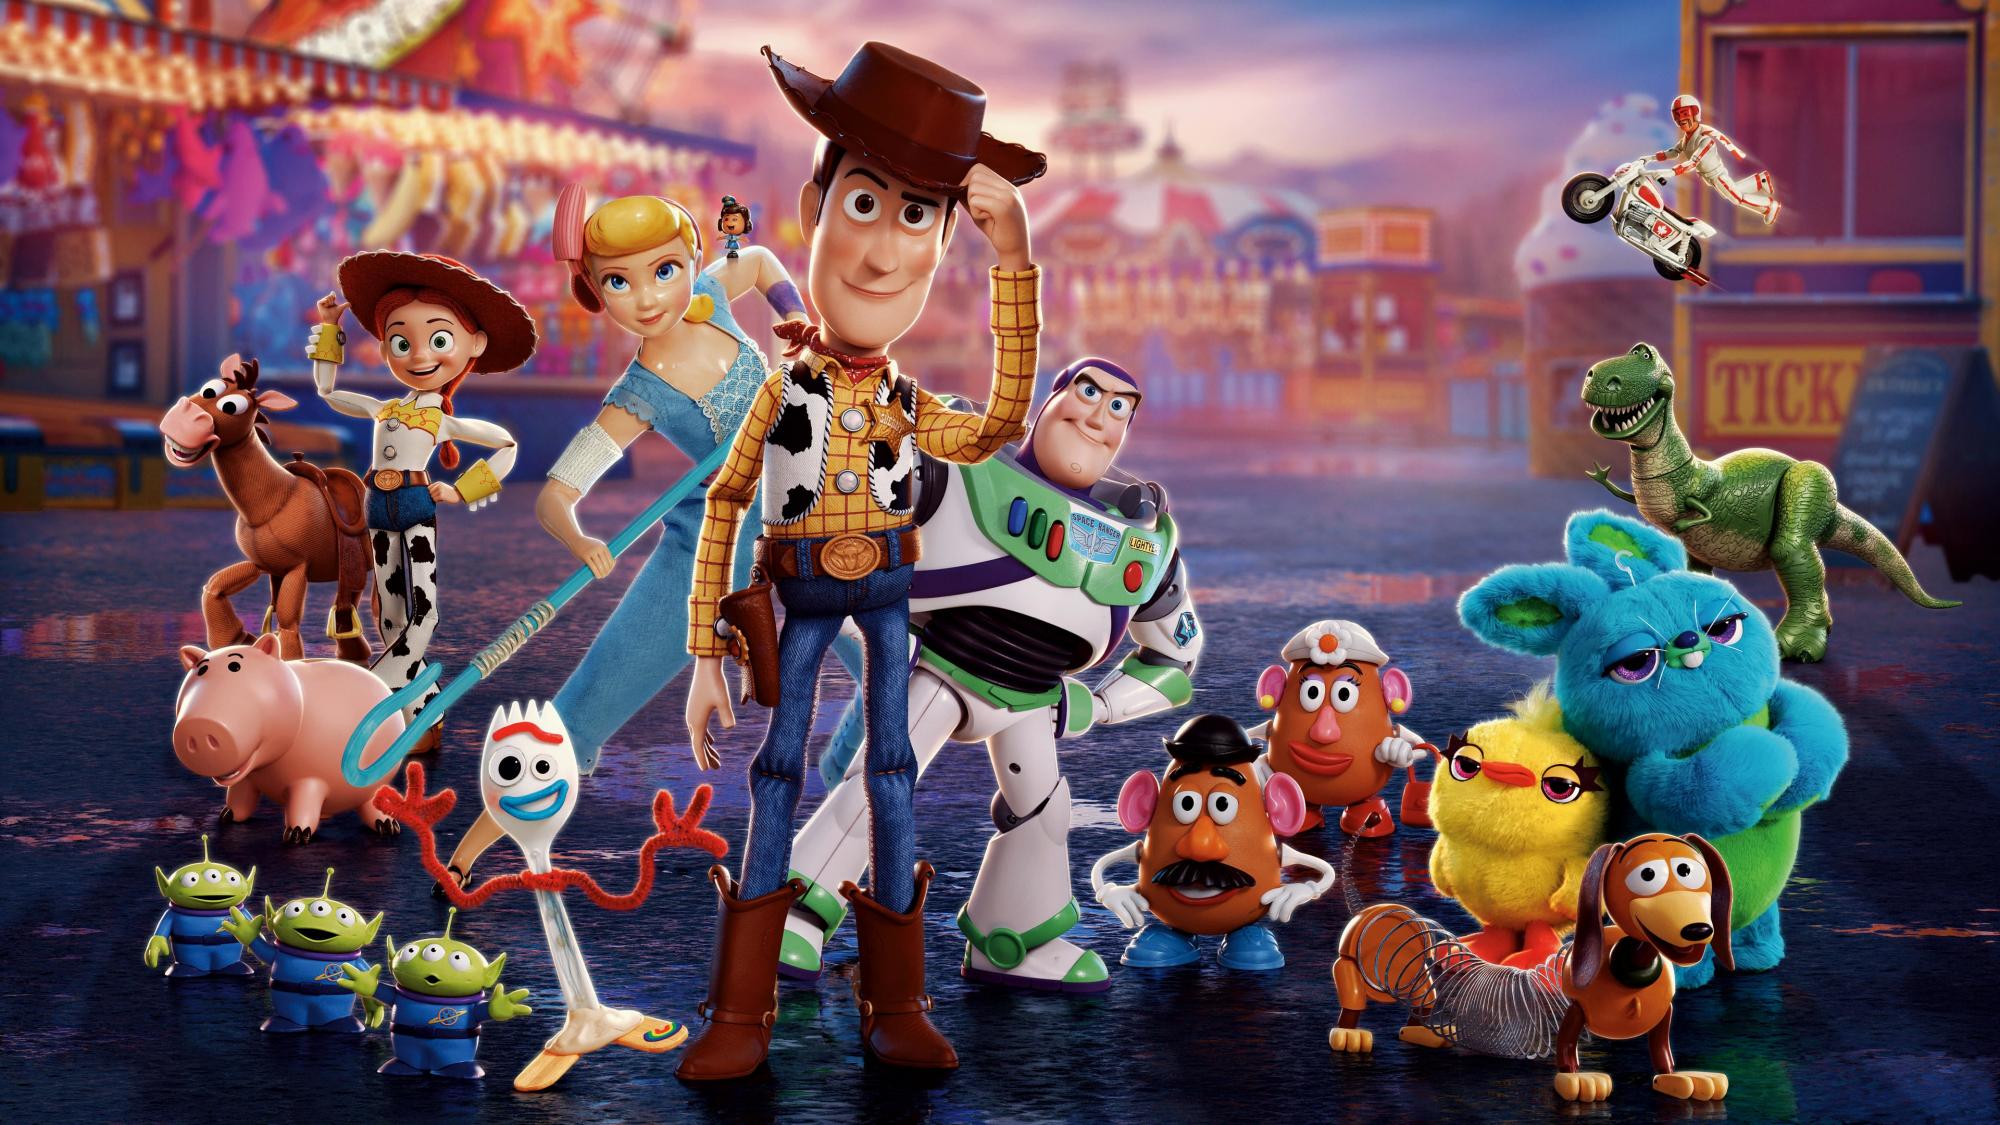 Backdrop Image for Toy Story 4